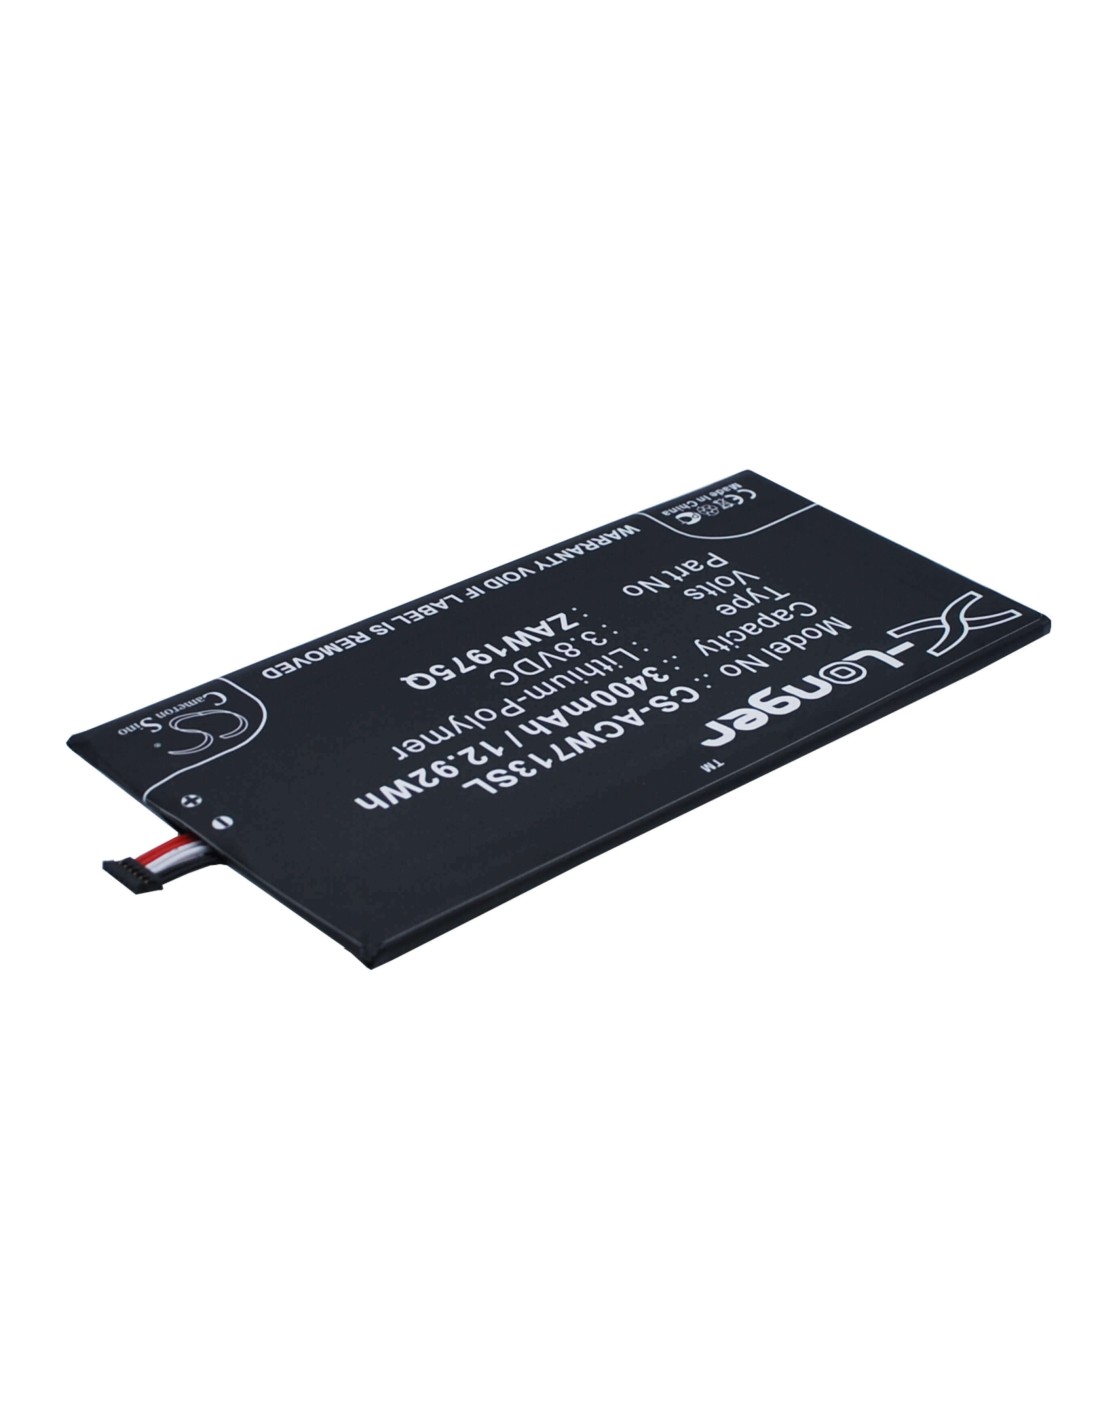 Battery for Acer Iconia Tab 7, A1-713, A1-713hd 3.8V, 3400mAh - 12.92Wh